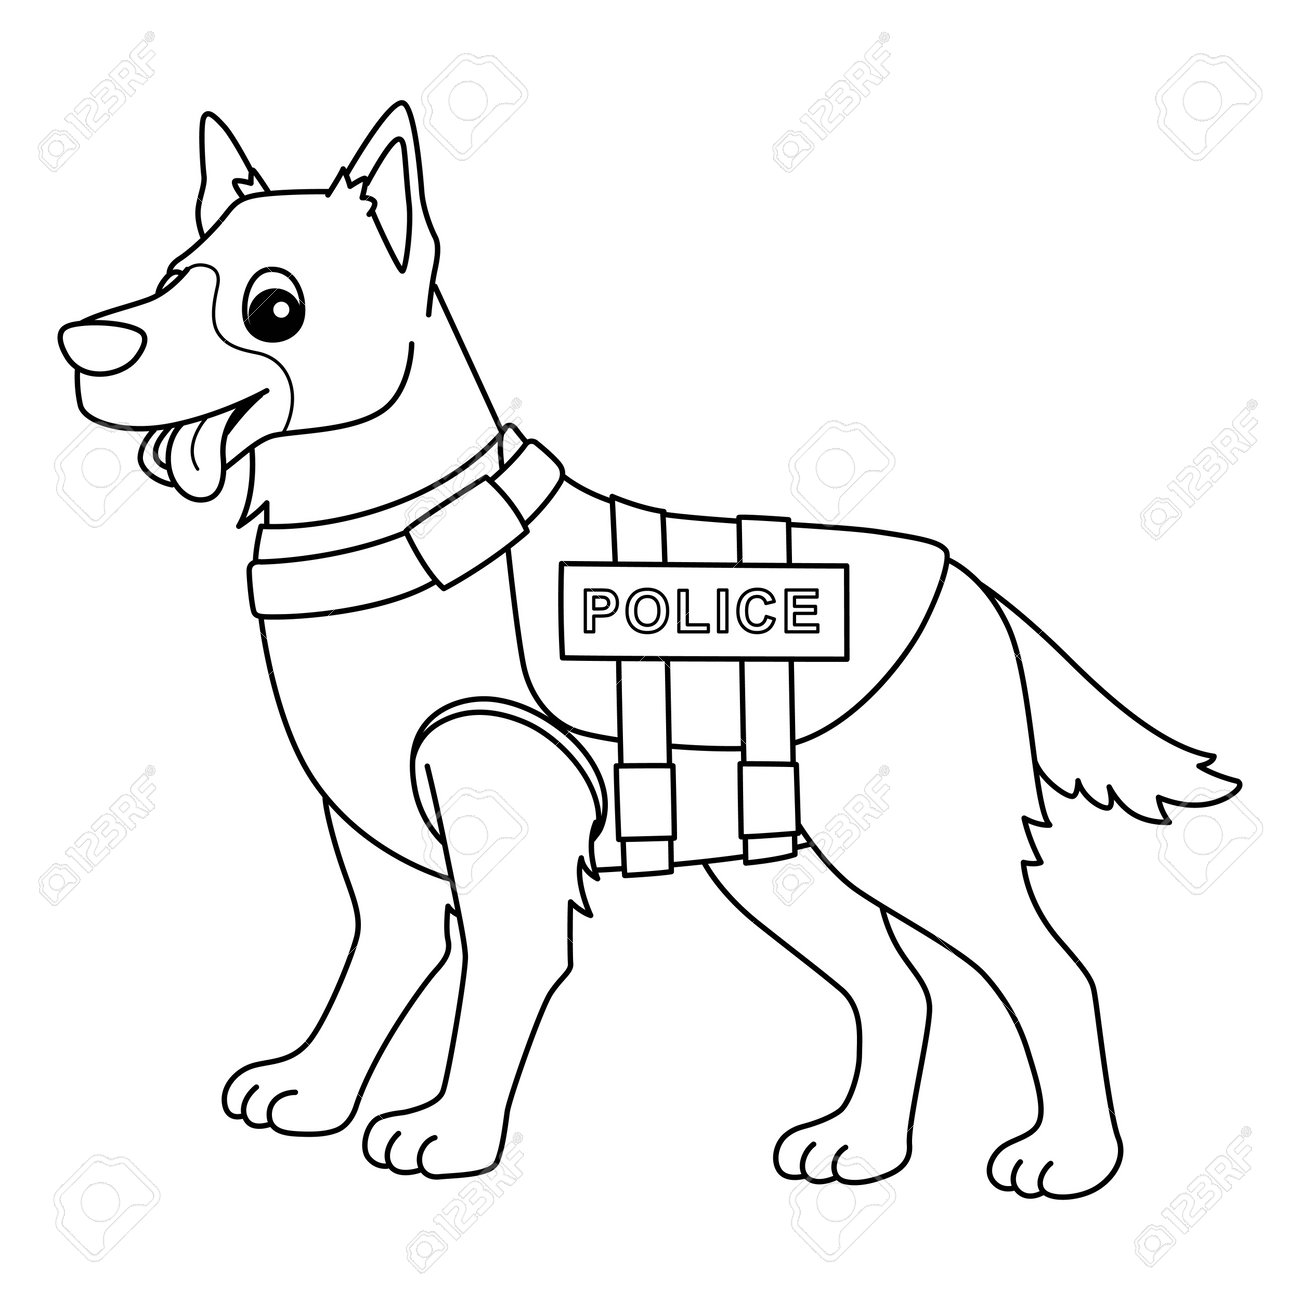 Police dog isolated coloring page for kids royalty free svg cliparts vectors and stock illustration image